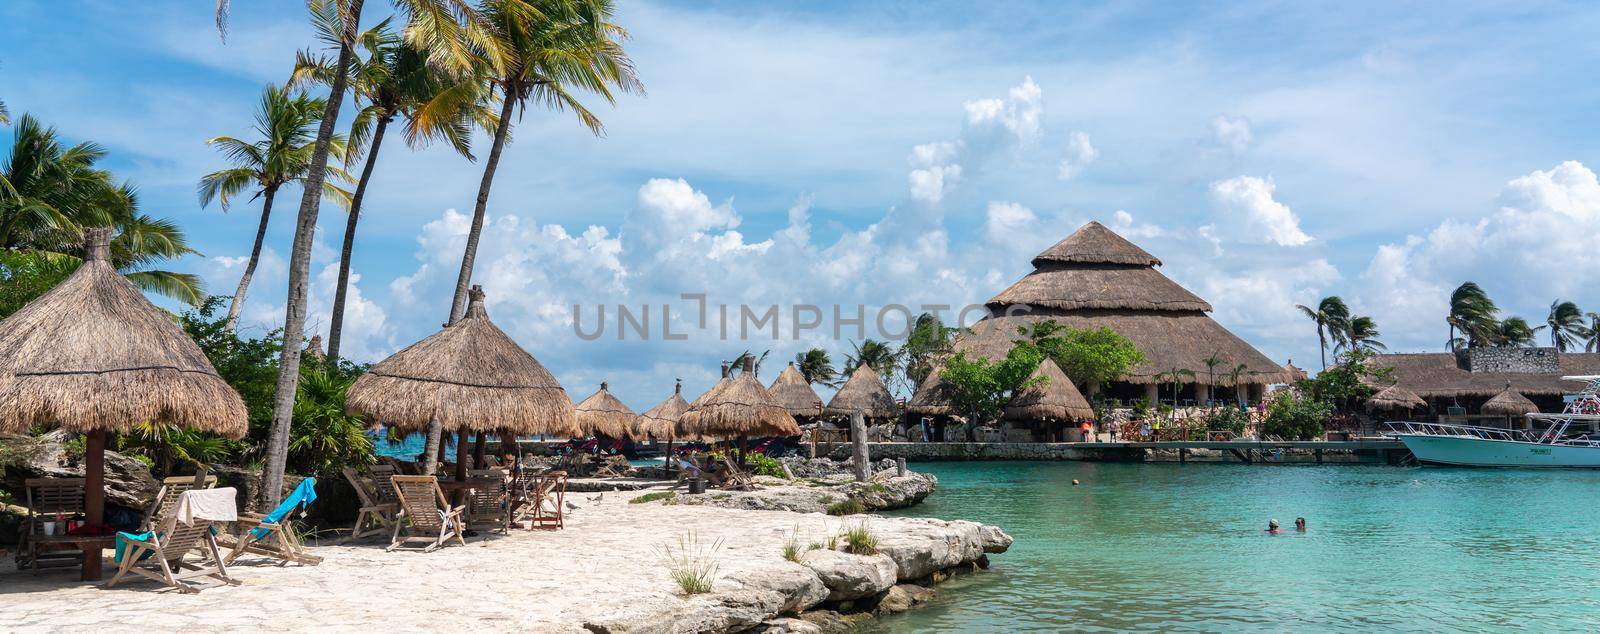 Cancun, Mexico - September 13, 2021: Lagoon at XCaret park on Mayan Riviera resort. XCaret is a famous ecotourism park on the mexican Mayan Riviera